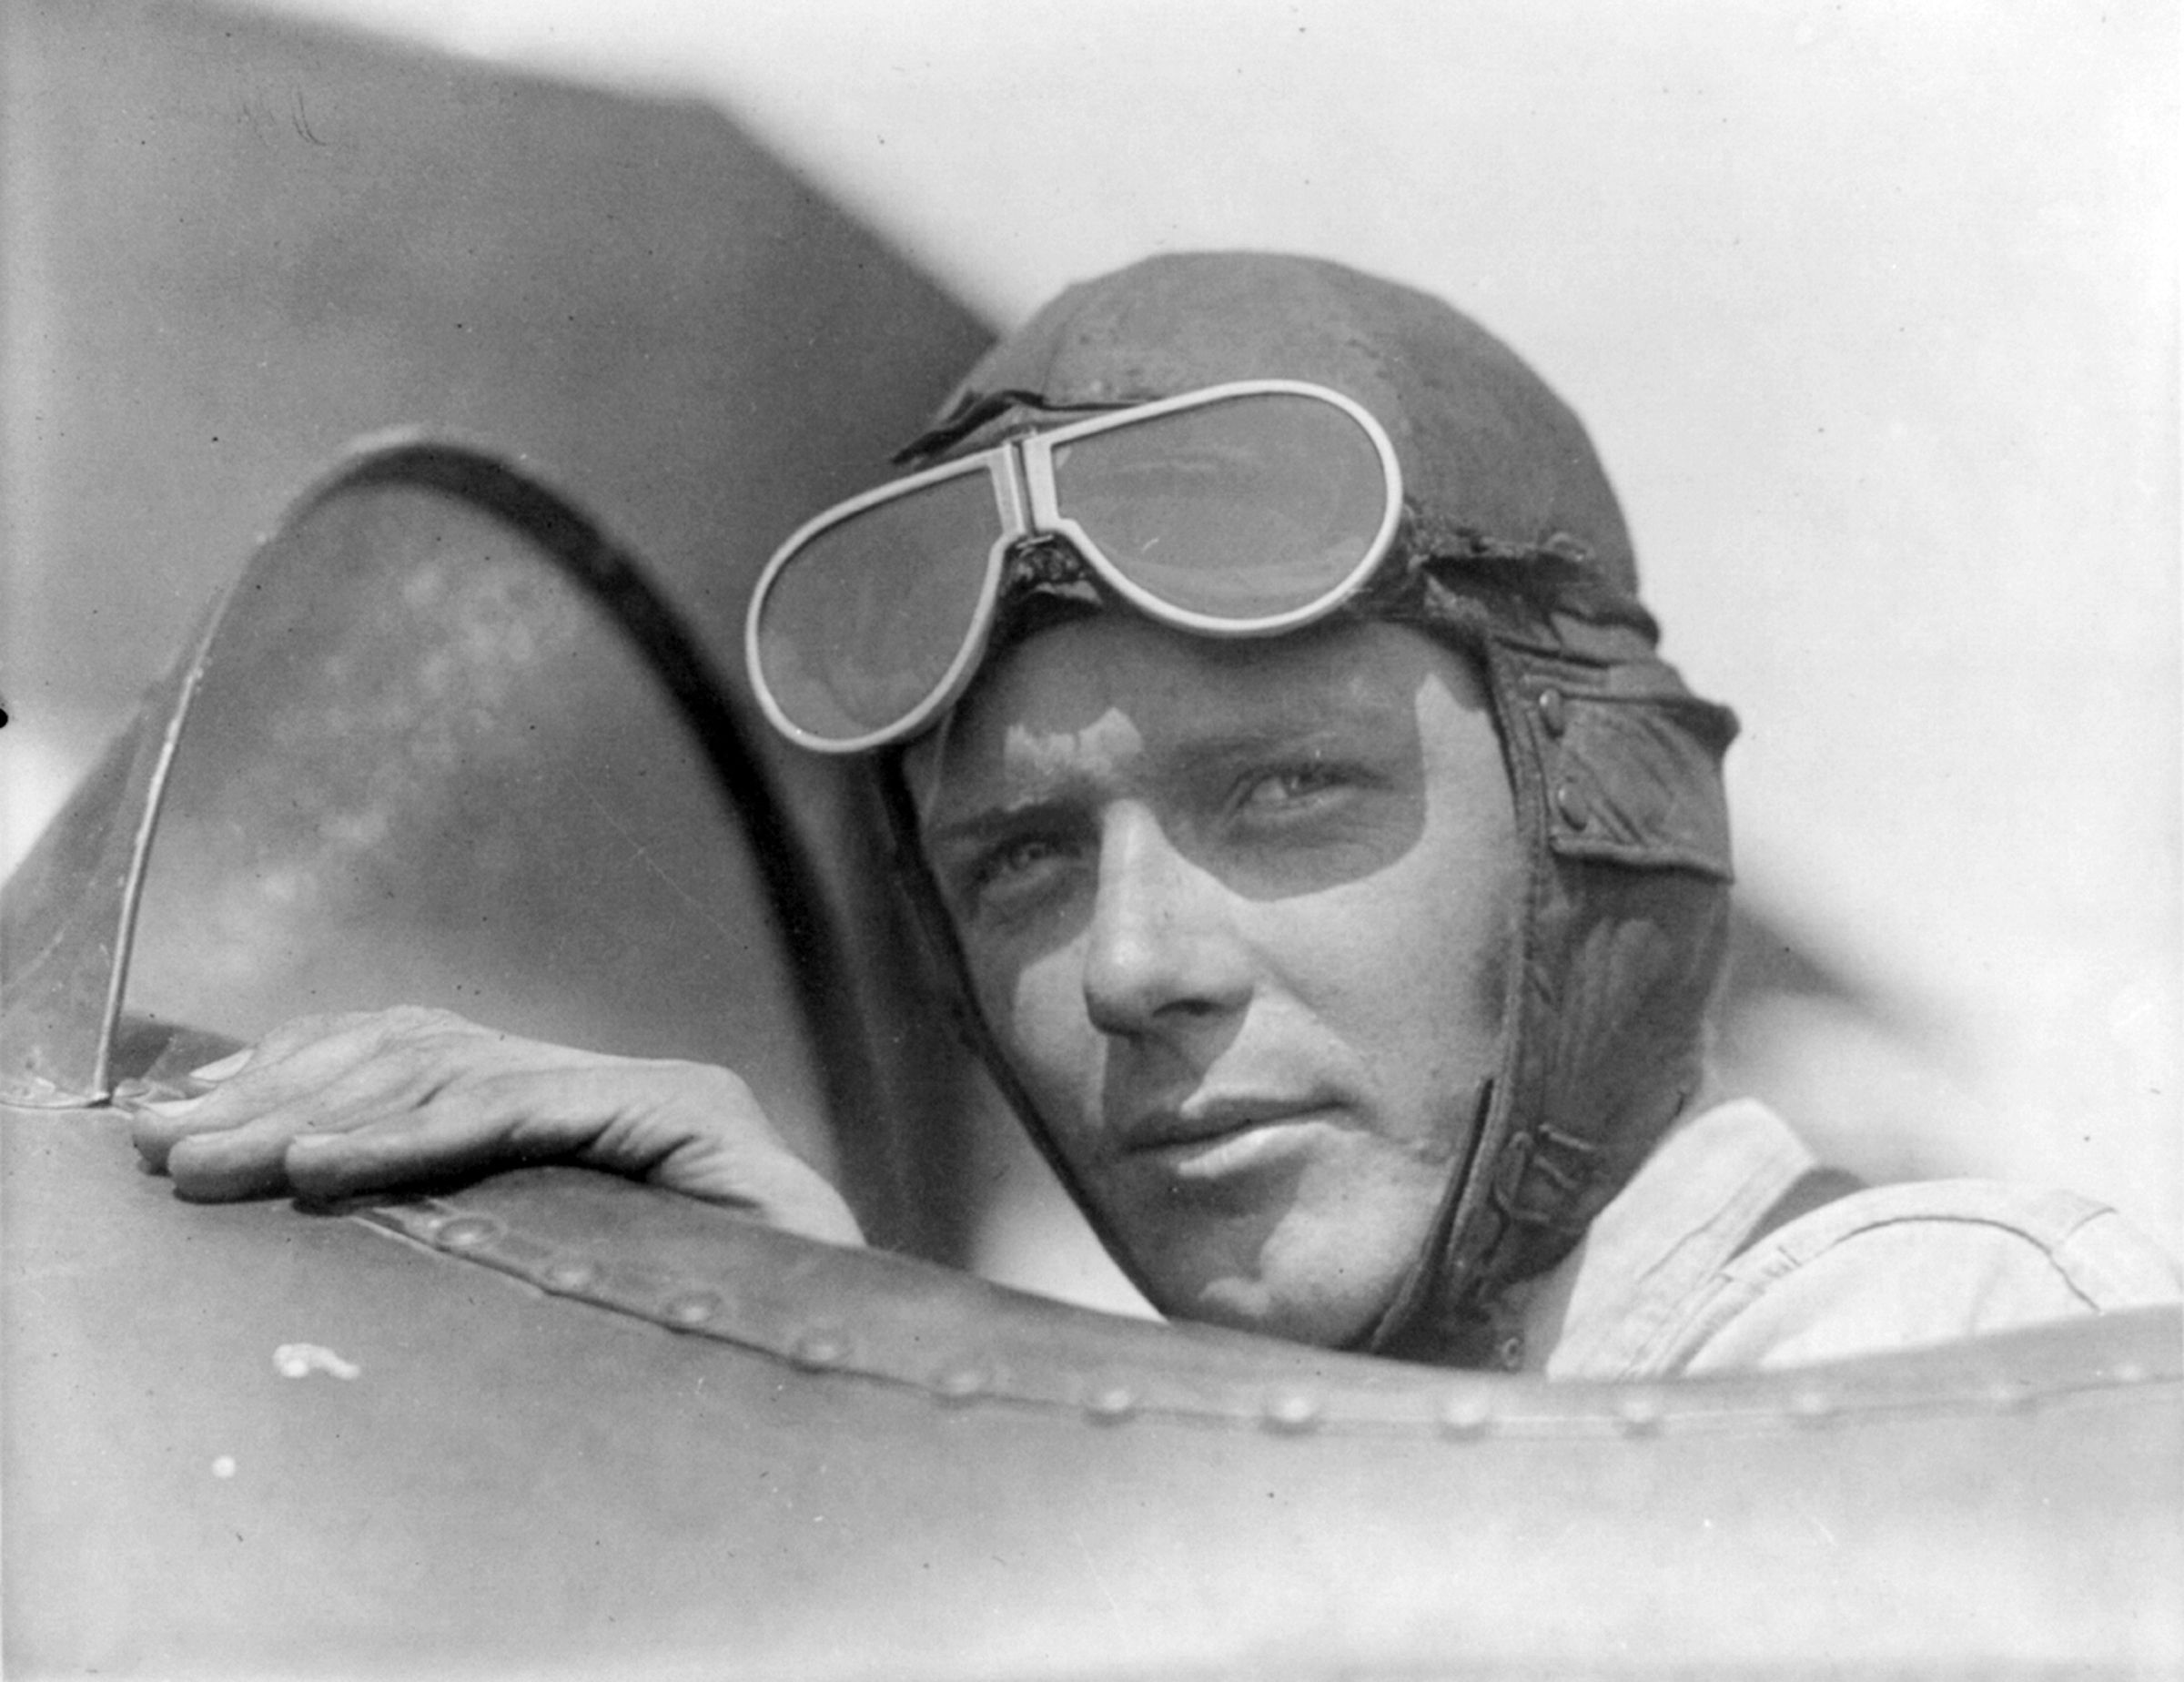 Vintage photo of a man wearing an aviator's cap and goggles looking out the cockpit of an early aircraft